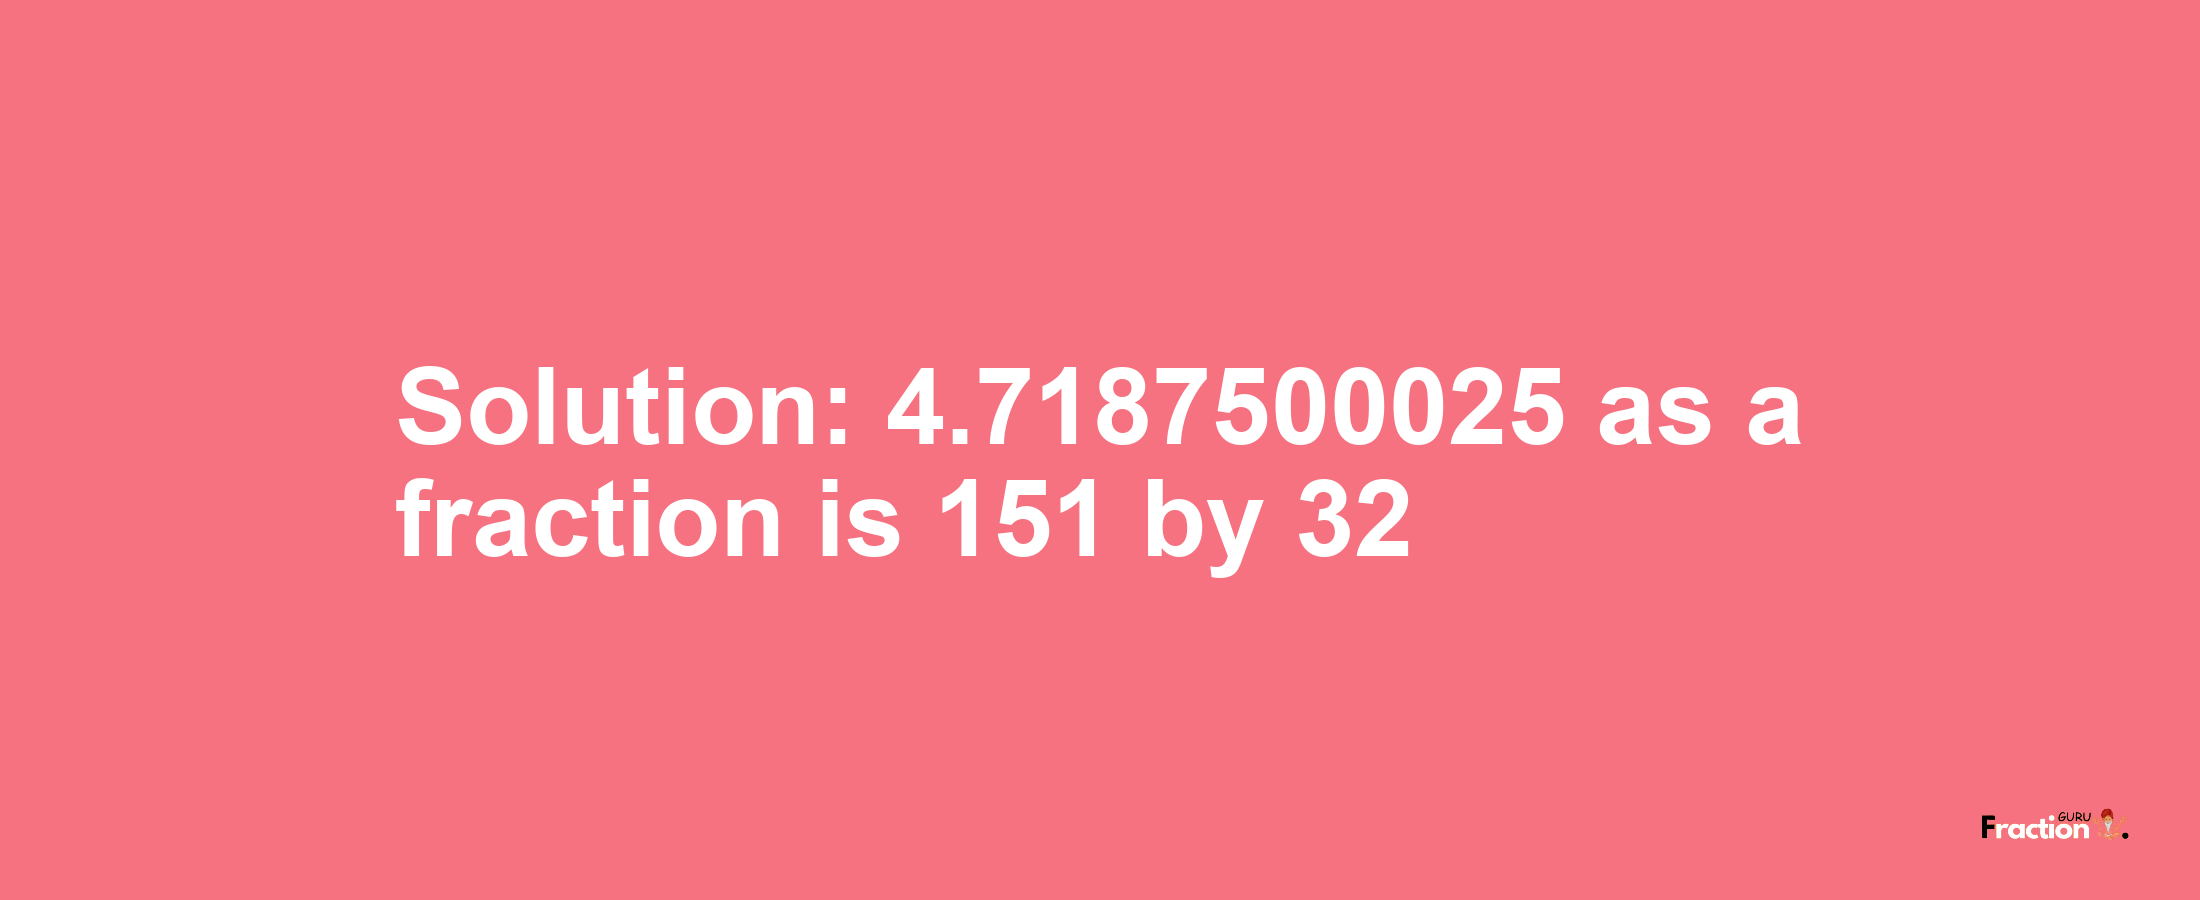 Solution:4.7187500025 as a fraction is 151/32